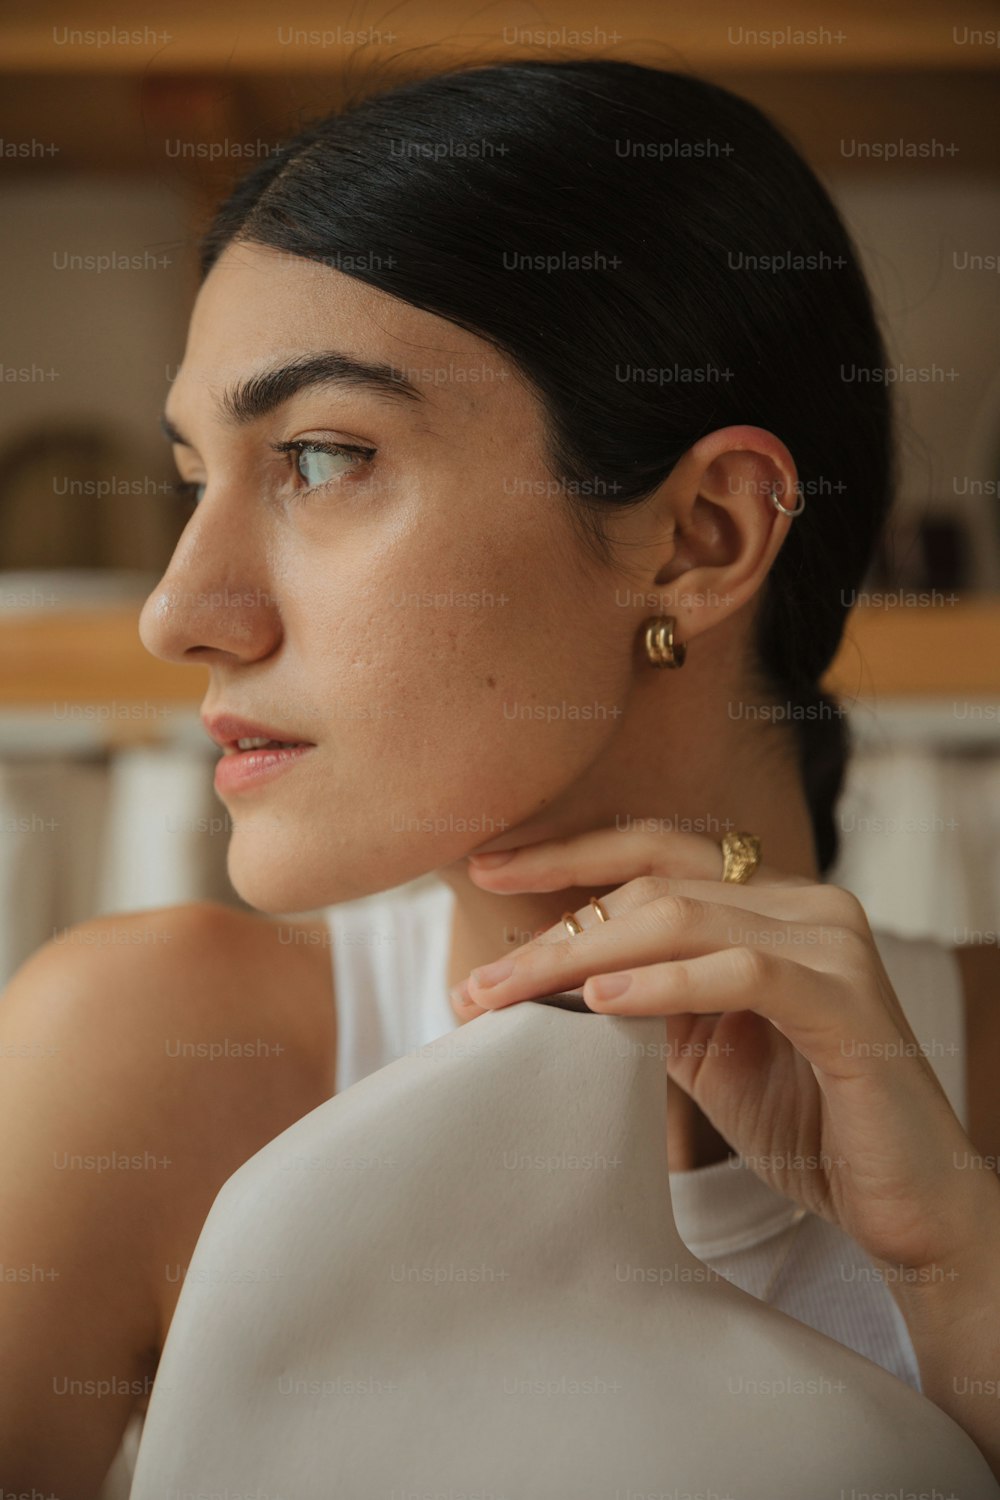 a woman in a white top is wearing a pair of earrings